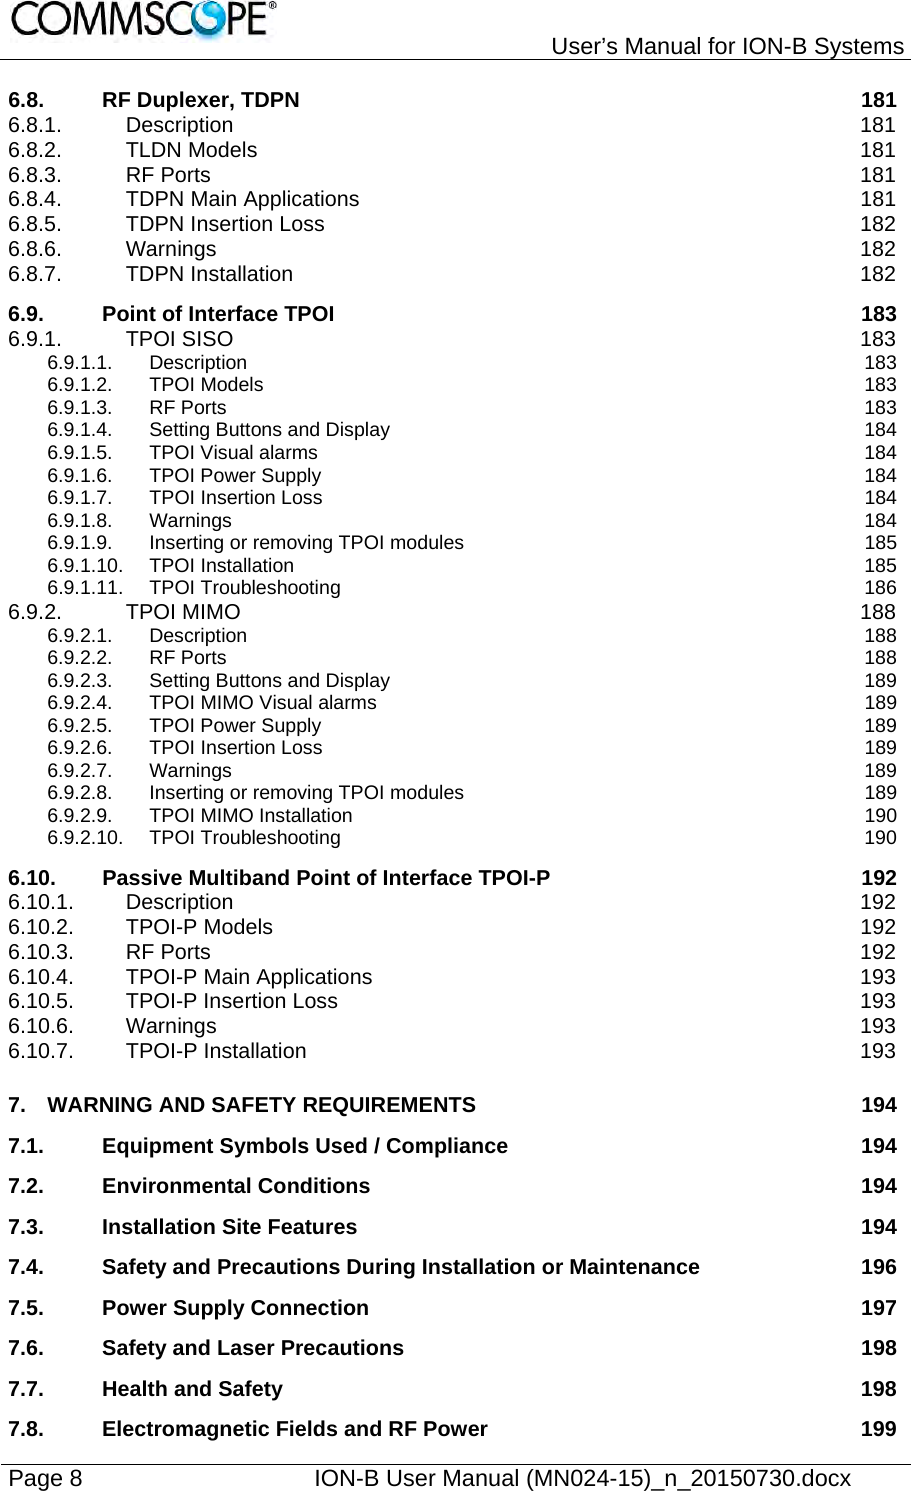   User’s Manual for ION-B Systems Page 8    ION-B User Manual (MN024-15)_n_20150730.docx  6.8.RF Duplexer, TDPN  1816.8.1.Description 1816.8.2.TLDN Models  1816.8.3.RF Ports  1816.8.4.TDPN Main Applications  1816.8.5.TDPN Insertion Loss  1826.8.6.Warnings 1826.8.7.TDPN Installation  1826.9.Point of Interface TPOI  1836.9.1.TPOI SISO  1836.9.1.1.Description 1836.9.1.2.TPOI Models  1836.9.1.3.RF Ports  1836.9.1.4.Setting Buttons and Display  1846.9.1.5.TPOI Visual alarms  1846.9.1.6.TPOI Power Supply  1846.9.1.7.TPOI Insertion Loss  1846.9.1.8.Warnings 1846.9.1.9.Inserting or removing TPOI modules  1856.9.1.10.TPOI Installation  1856.9.1.11.TPOI Troubleshooting  1866.9.2.TPOI MIMO  1886.9.2.1.Description 1886.9.2.2.RF Ports  1886.9.2.3.Setting Buttons and Display  1896.9.2.4.TPOI MIMO Visual alarms  1896.9.2.5.TPOI Power Supply  1896.9.2.6.TPOI Insertion Loss  1896.9.2.7.Warnings 1896.9.2.8.Inserting or removing TPOI modules  1896.9.2.9.TPOI MIMO Installation  1906.9.2.10.TPOI Troubleshooting  1906.10.Passive Multiband Point of Interface TPOI-P  1926.10.1.Description 1926.10.2.TPOI-P Models  1926.10.3.RF Ports  1926.10.4.TPOI-P Main Applications  1936.10.5.TPOI-P Insertion Loss  1936.10.6.Warnings 1936.10.7.TPOI-P Installation  1937.WARNING AND SAFETY REQUIREMENTS  1947.1.Equipment Symbols Used / Compliance  1947.2.Environmental Conditions  1947.3.Installation Site Features  1947.4.Safety and Precautions During Installation or Maintenance  1967.5.Power Supply Connection  1977.6.Safety and Laser Precautions  1987.7.Health and Safety  1987.8.Electromagnetic Fields and RF Power  199